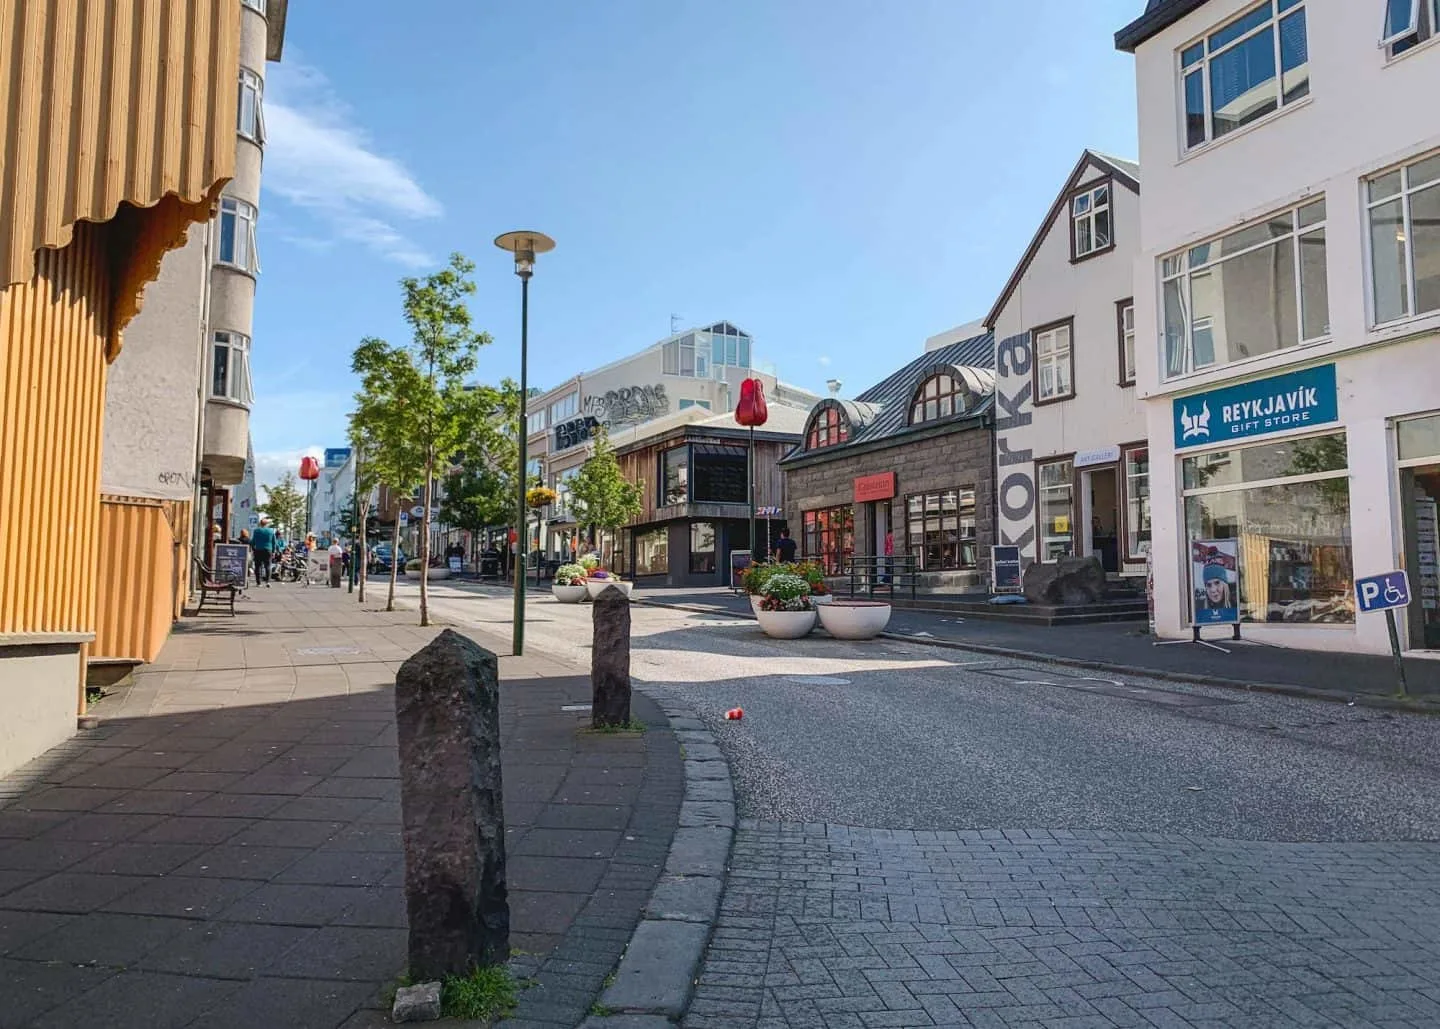 Things to do in Downtown Reykjavik | Diary of a Toronto Girl, a Canadian lifestyle blog